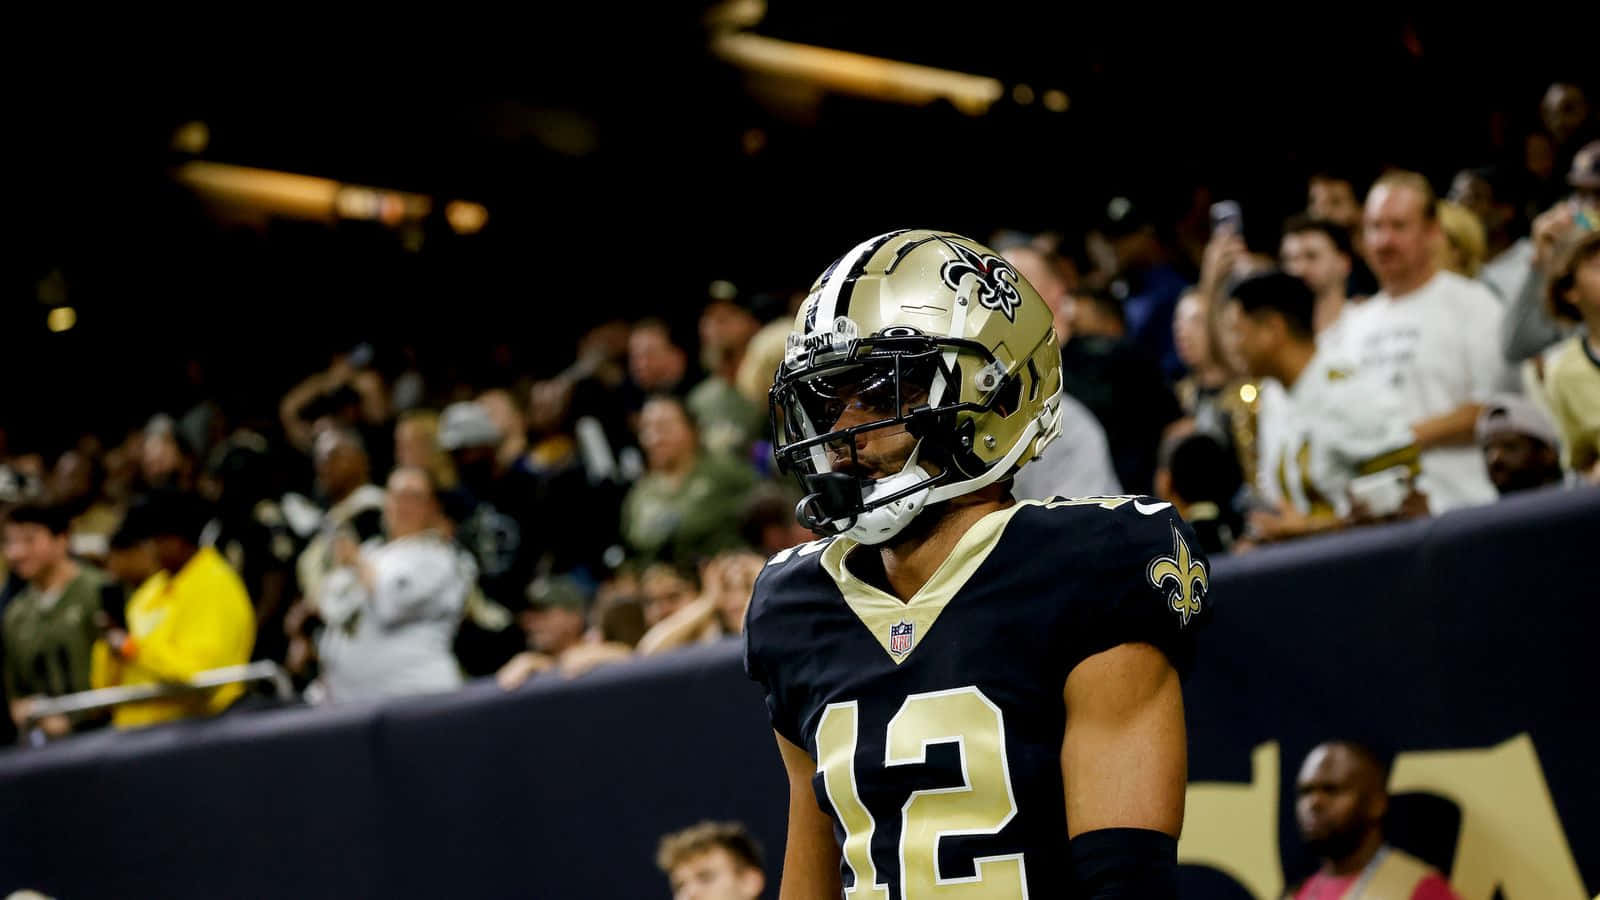 New Orleans Saints Player Focused During Game Wallpaper